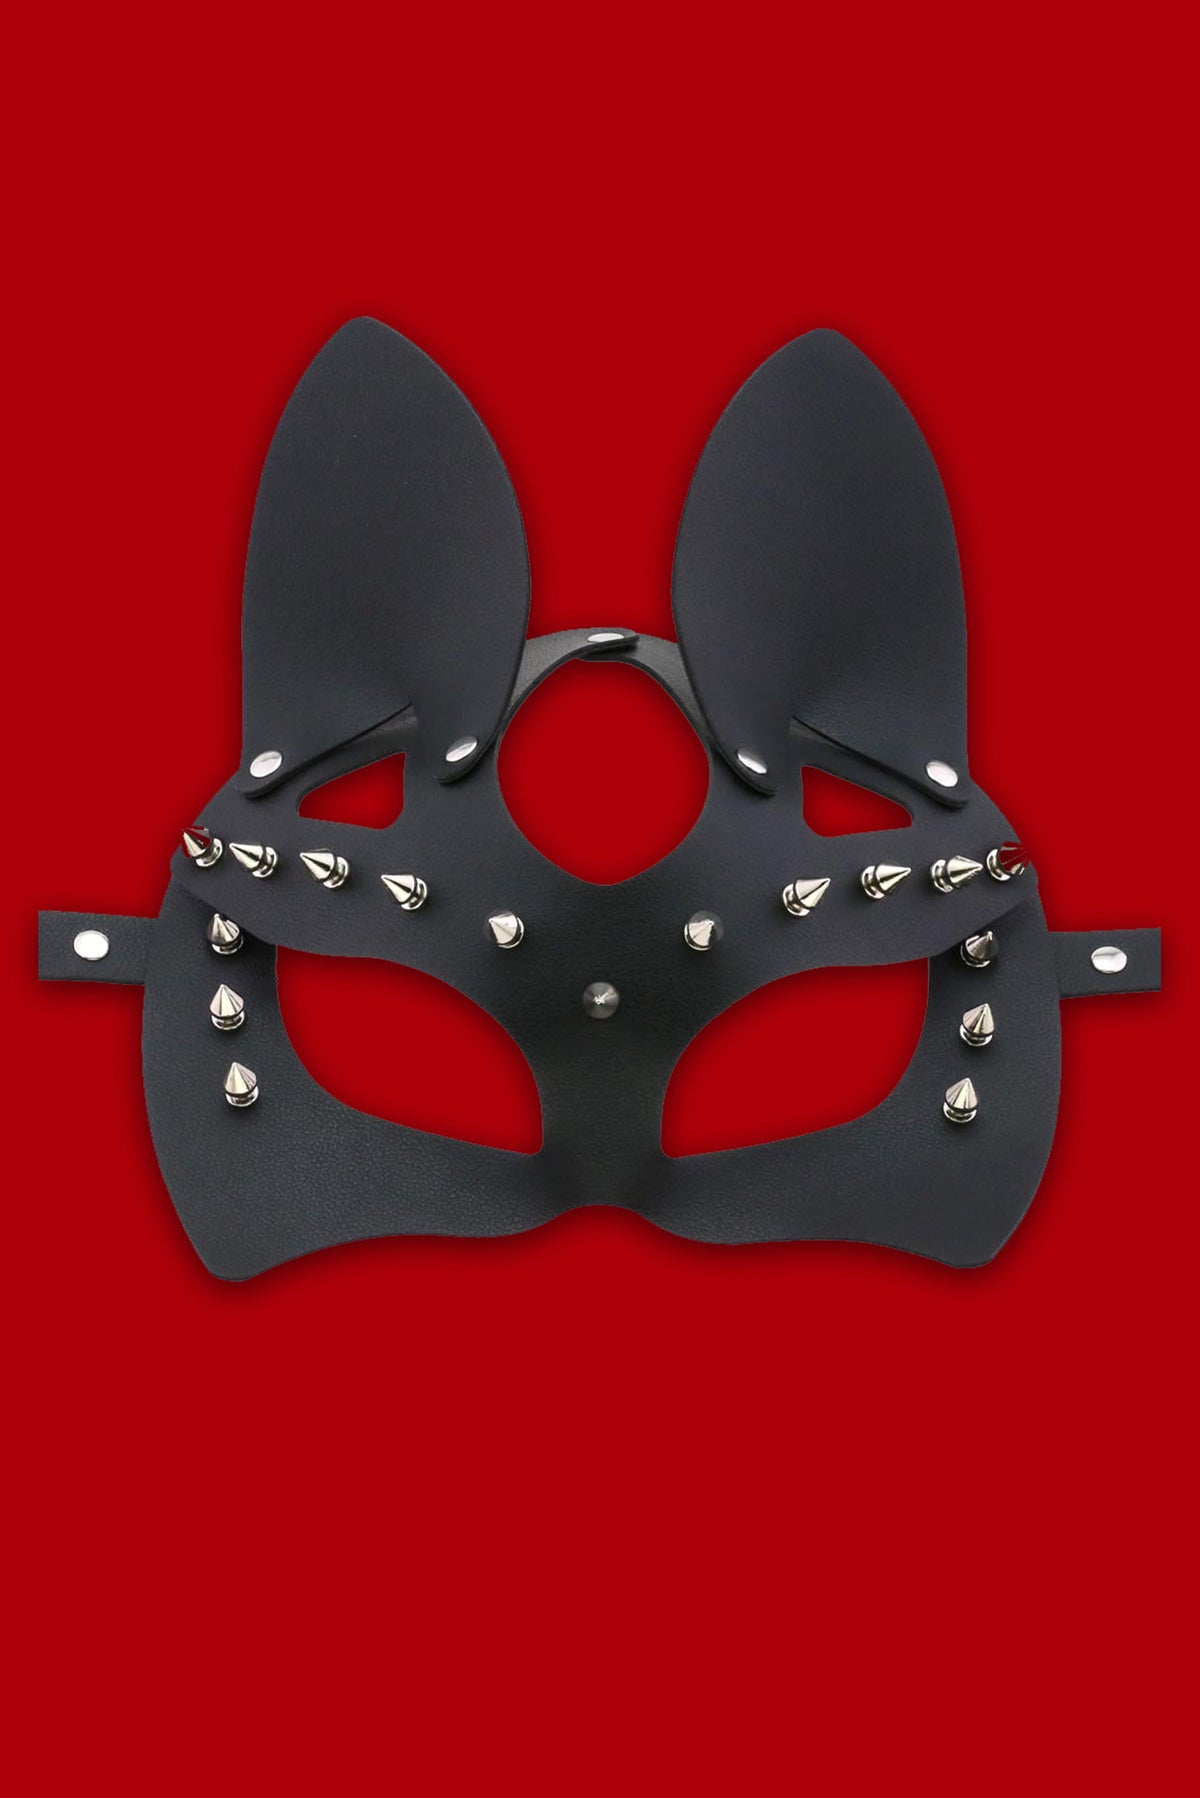 Spiked Bunny Mask